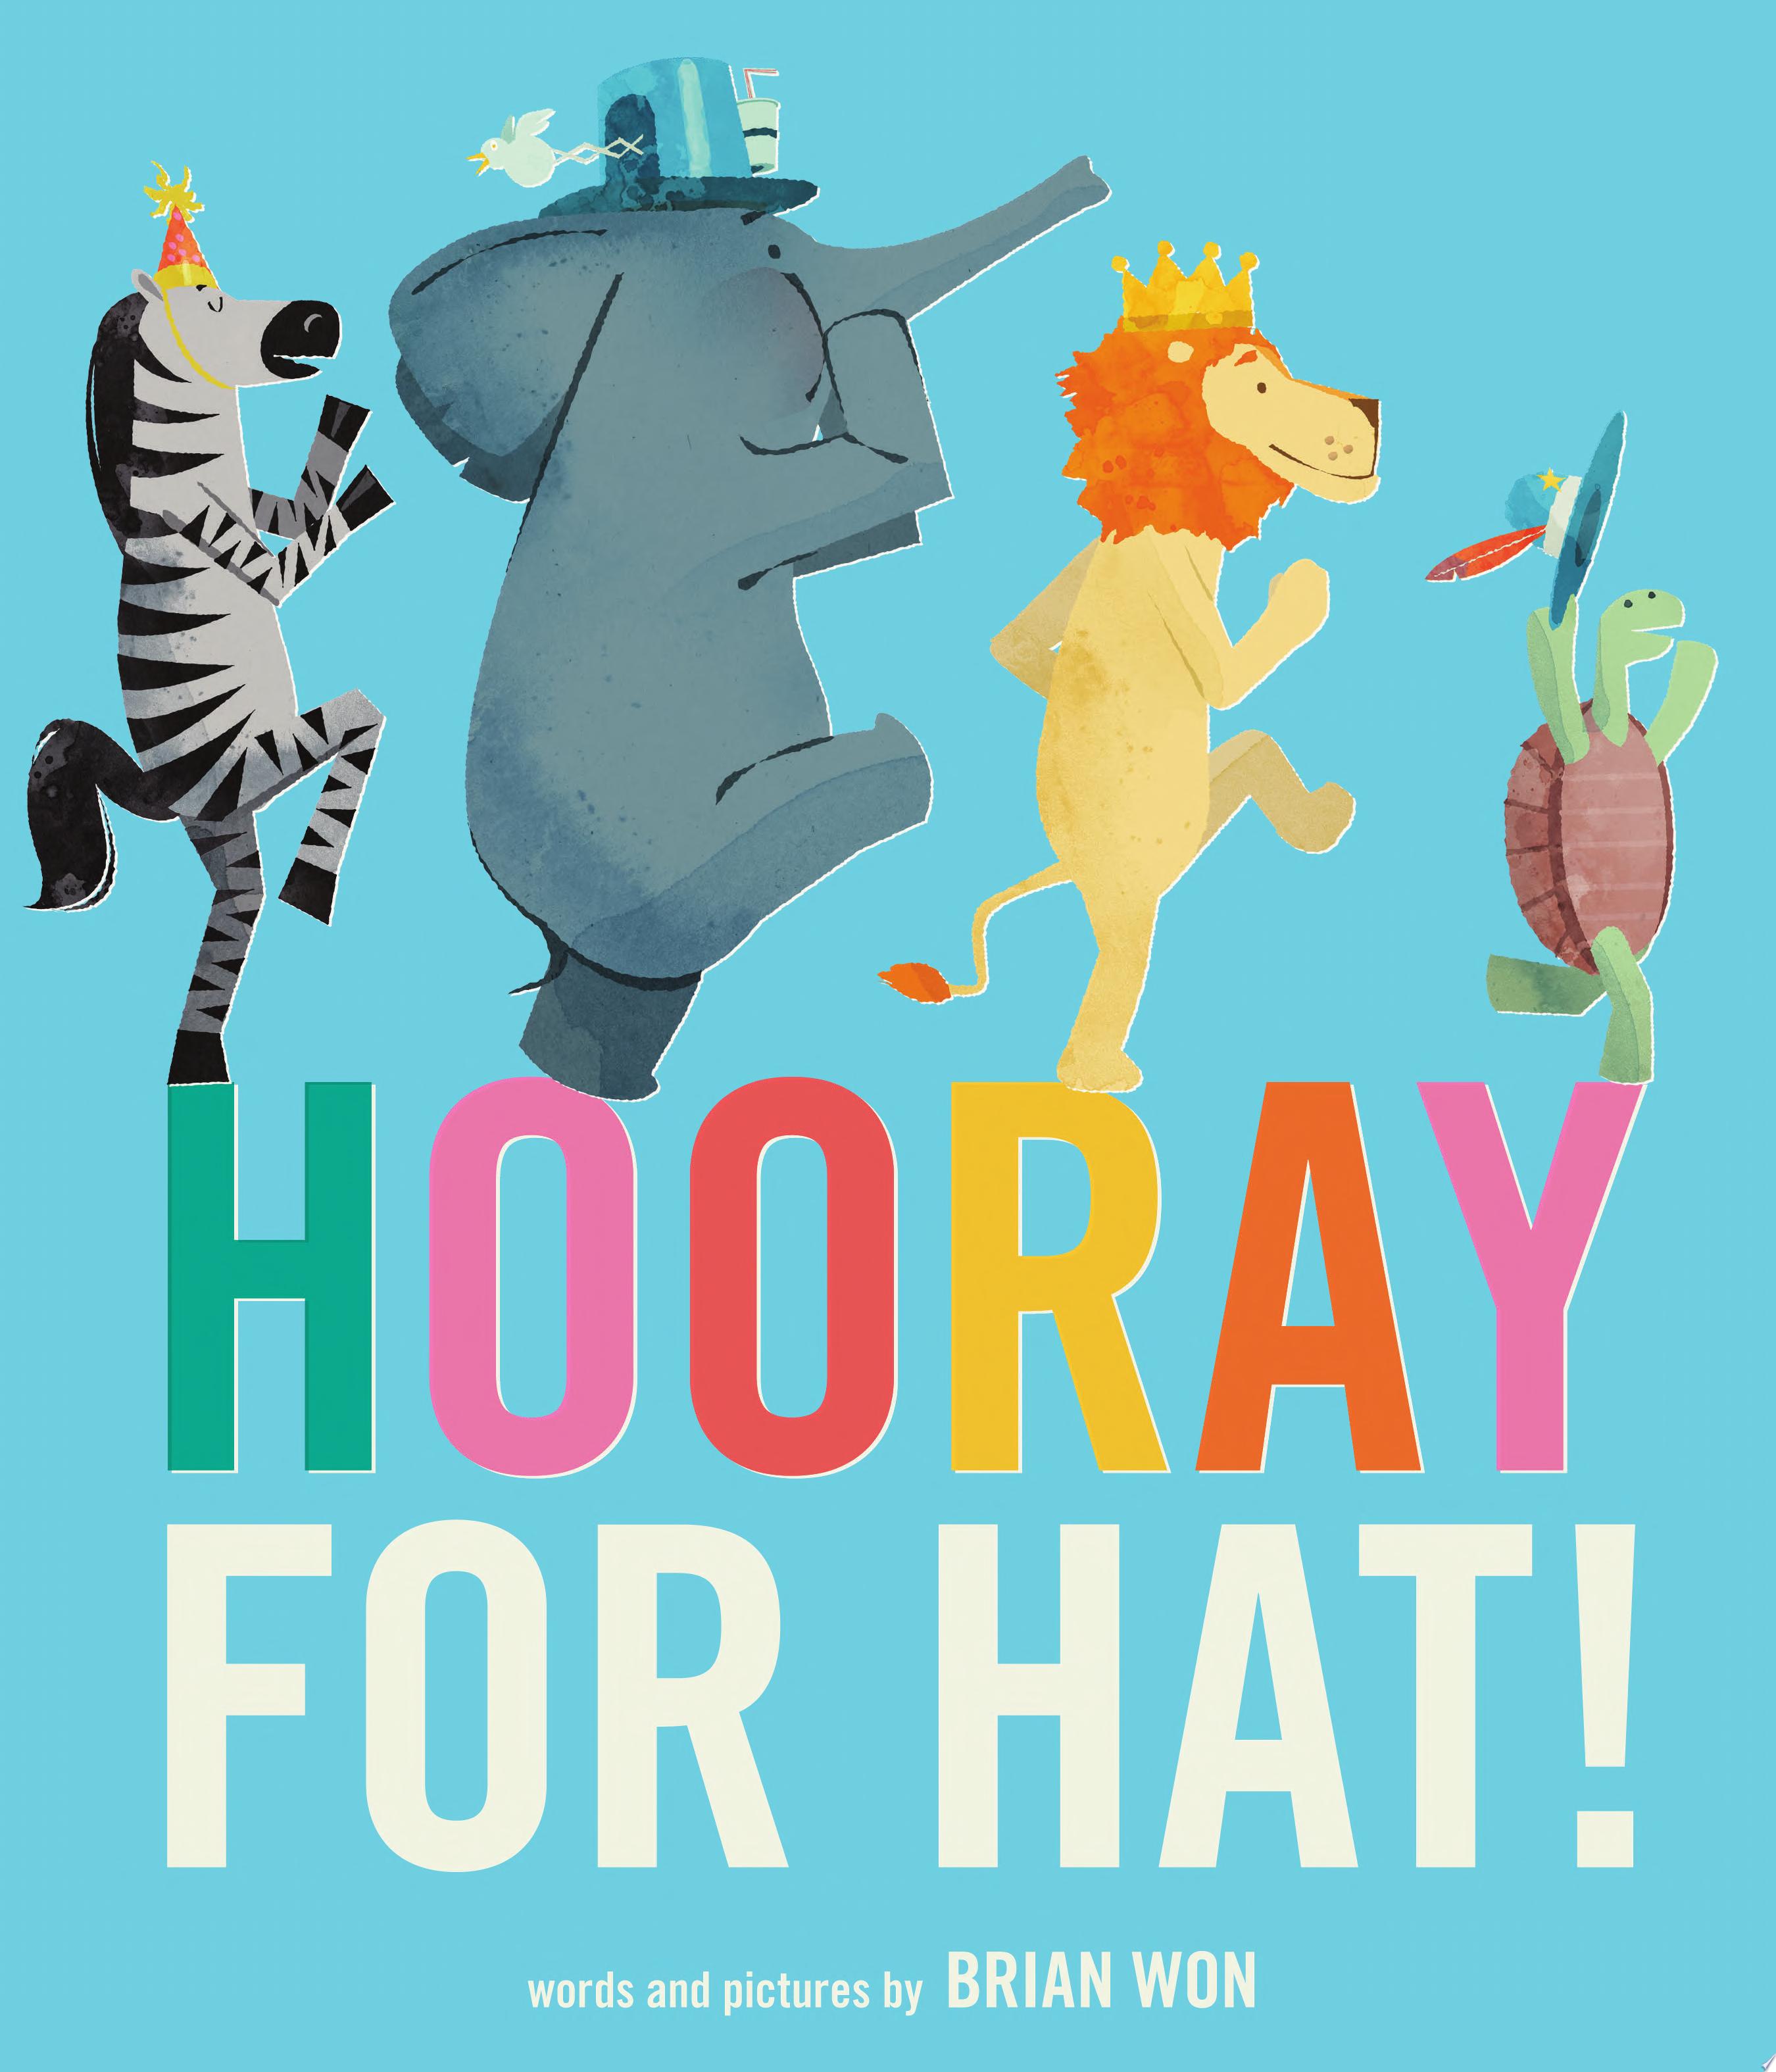 Image for "Hooray for Hat!"